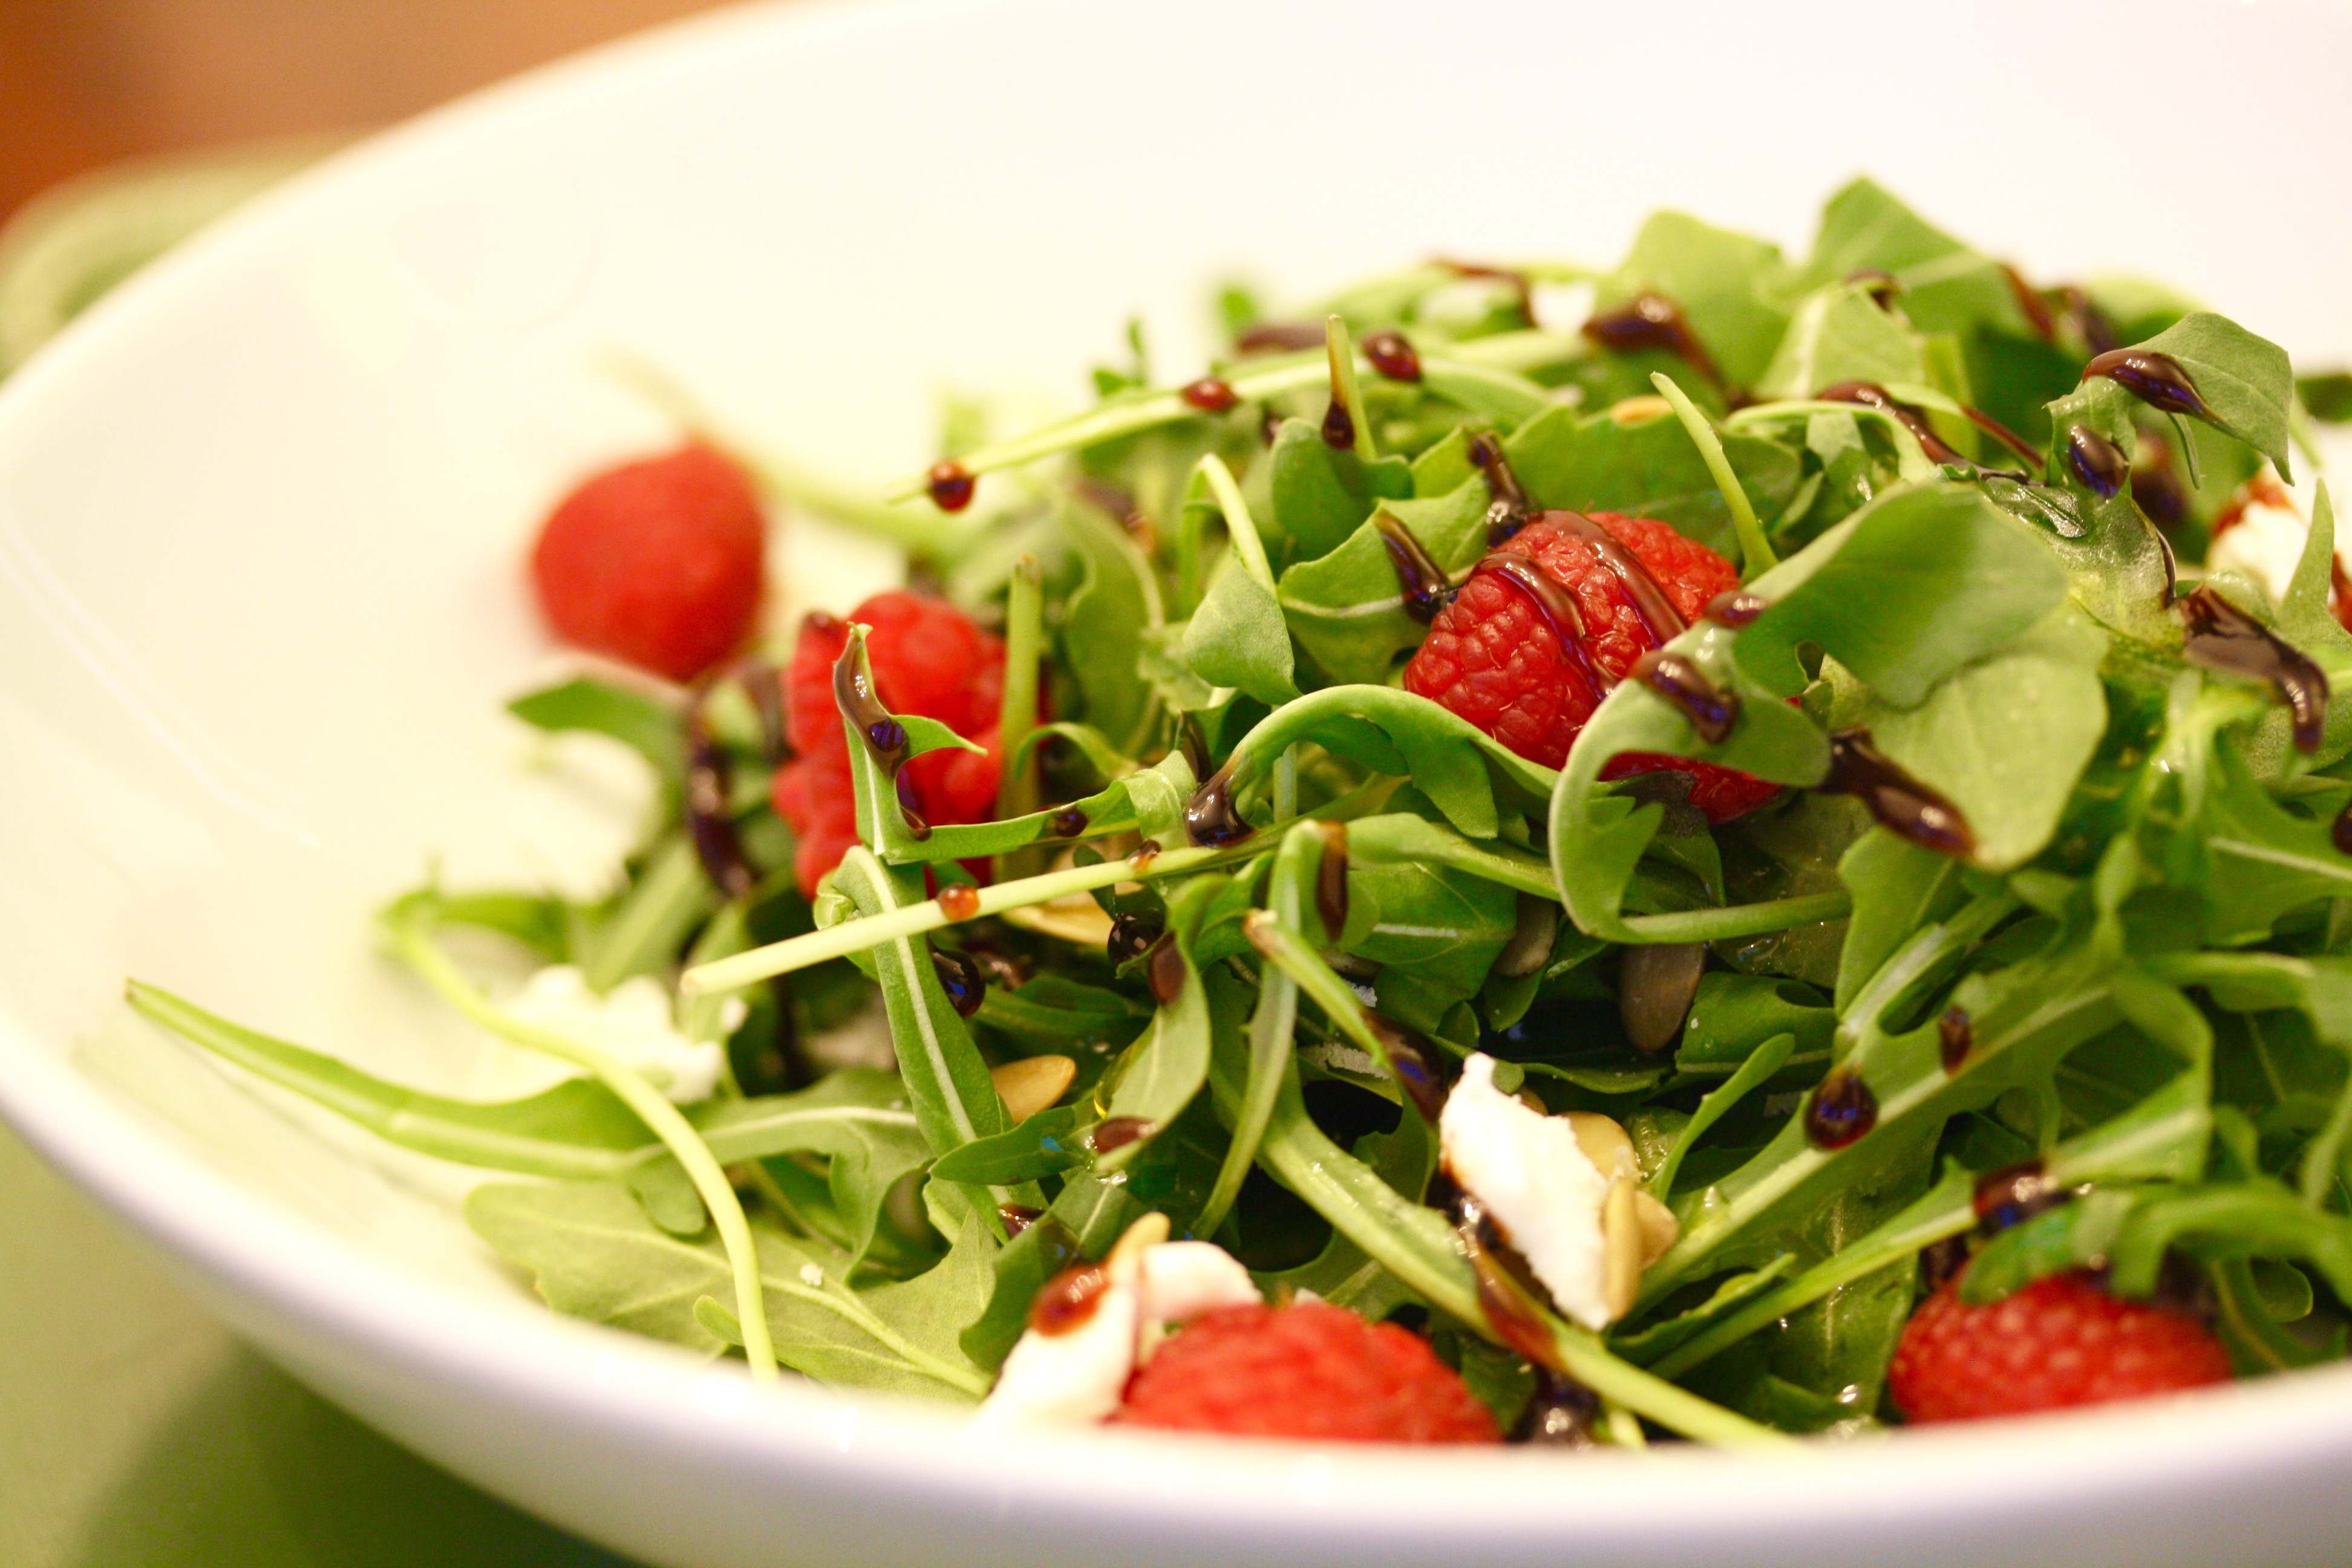 Weeknight Arugula Salad with Goat Cheese and Balsamic Reduction